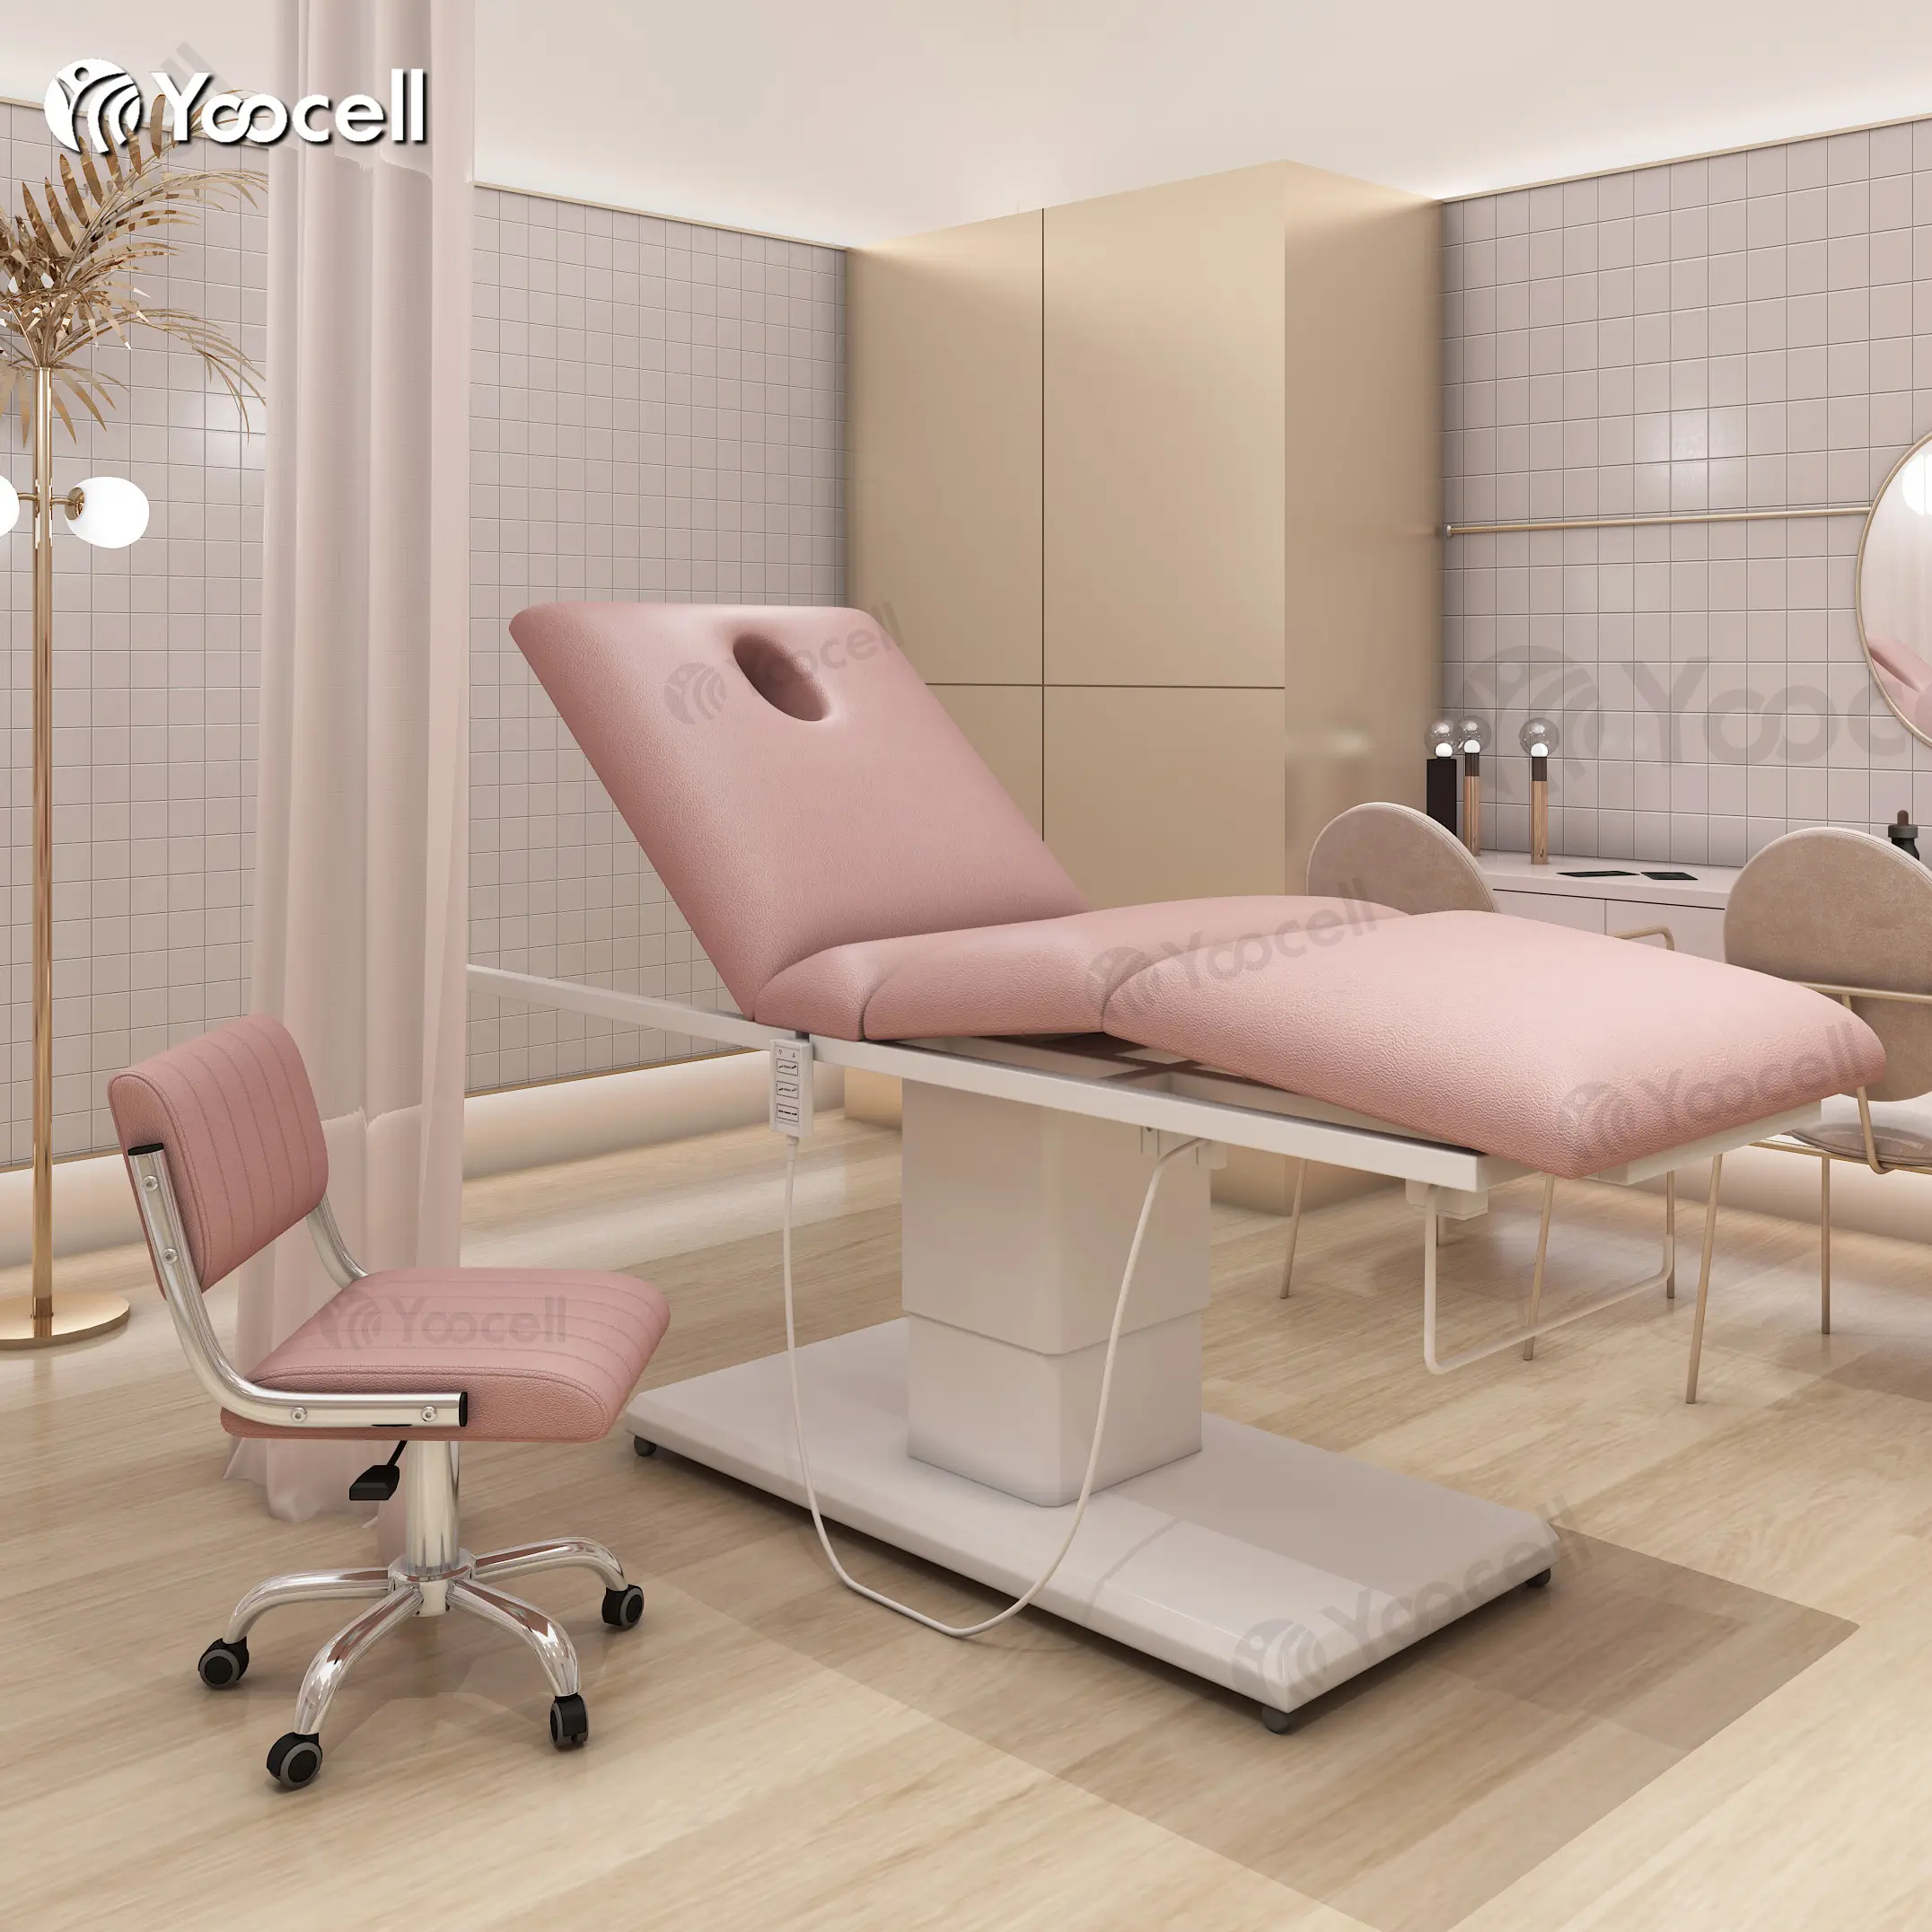 Yoocell hot selling pink lash bed treatment chair electric beauty facial bed massage table bed with 3 motors for spa salon